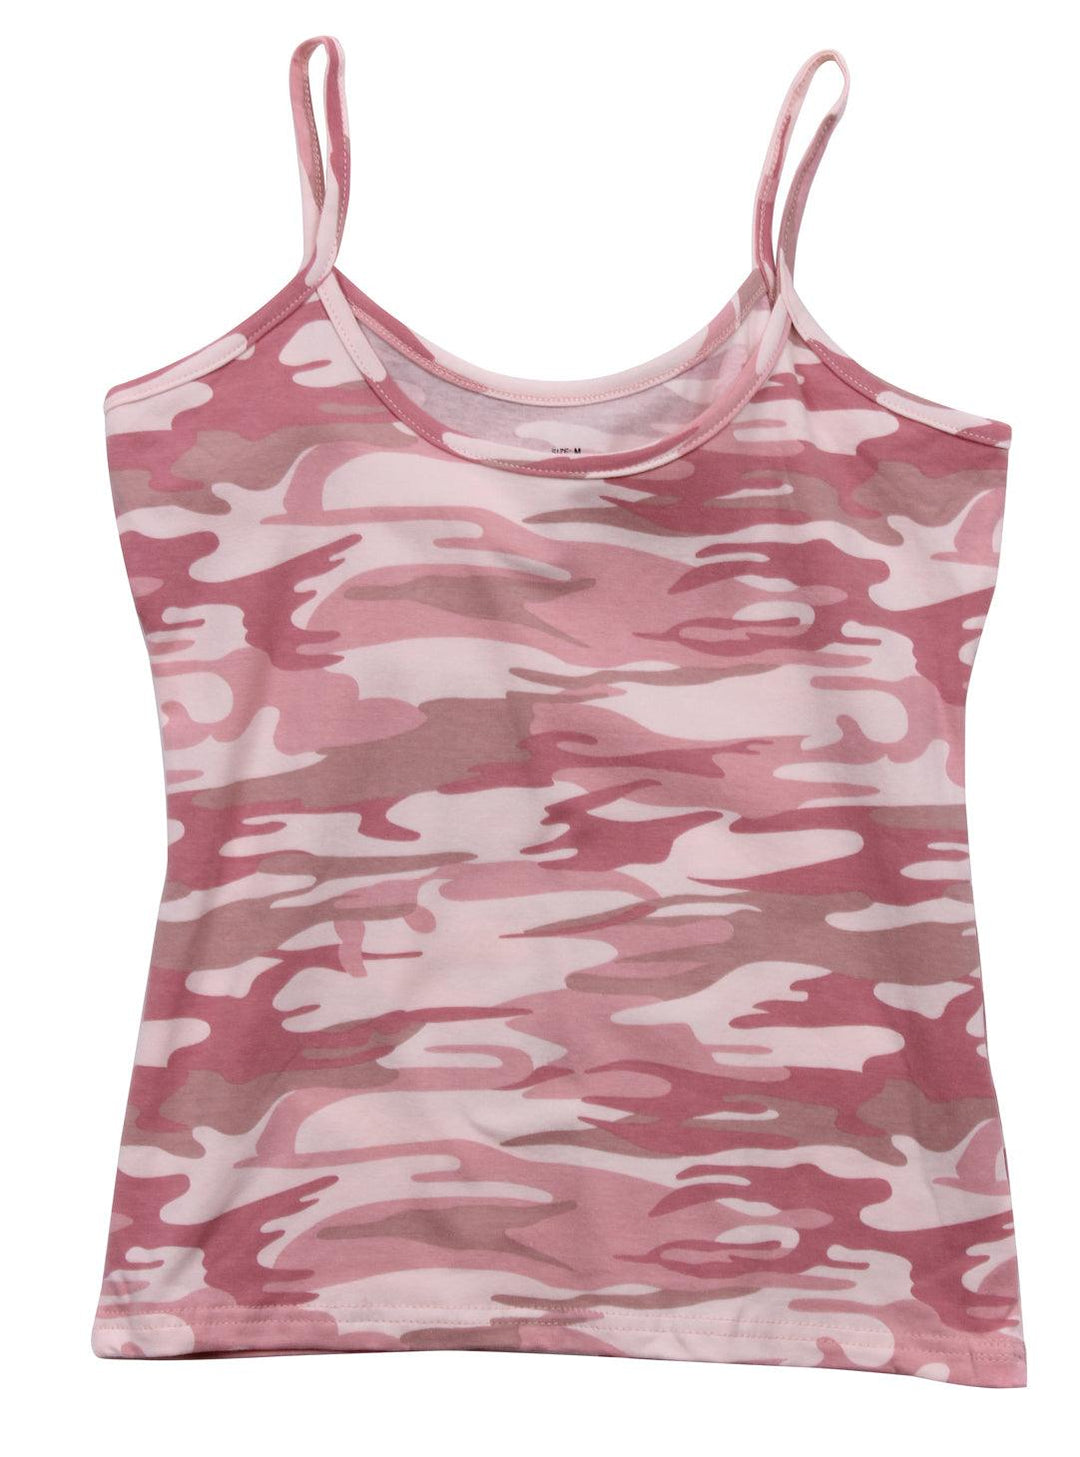 Baby Pink Camo "Booty Camp" Booty Shorts & Tank Top - Legendary USA